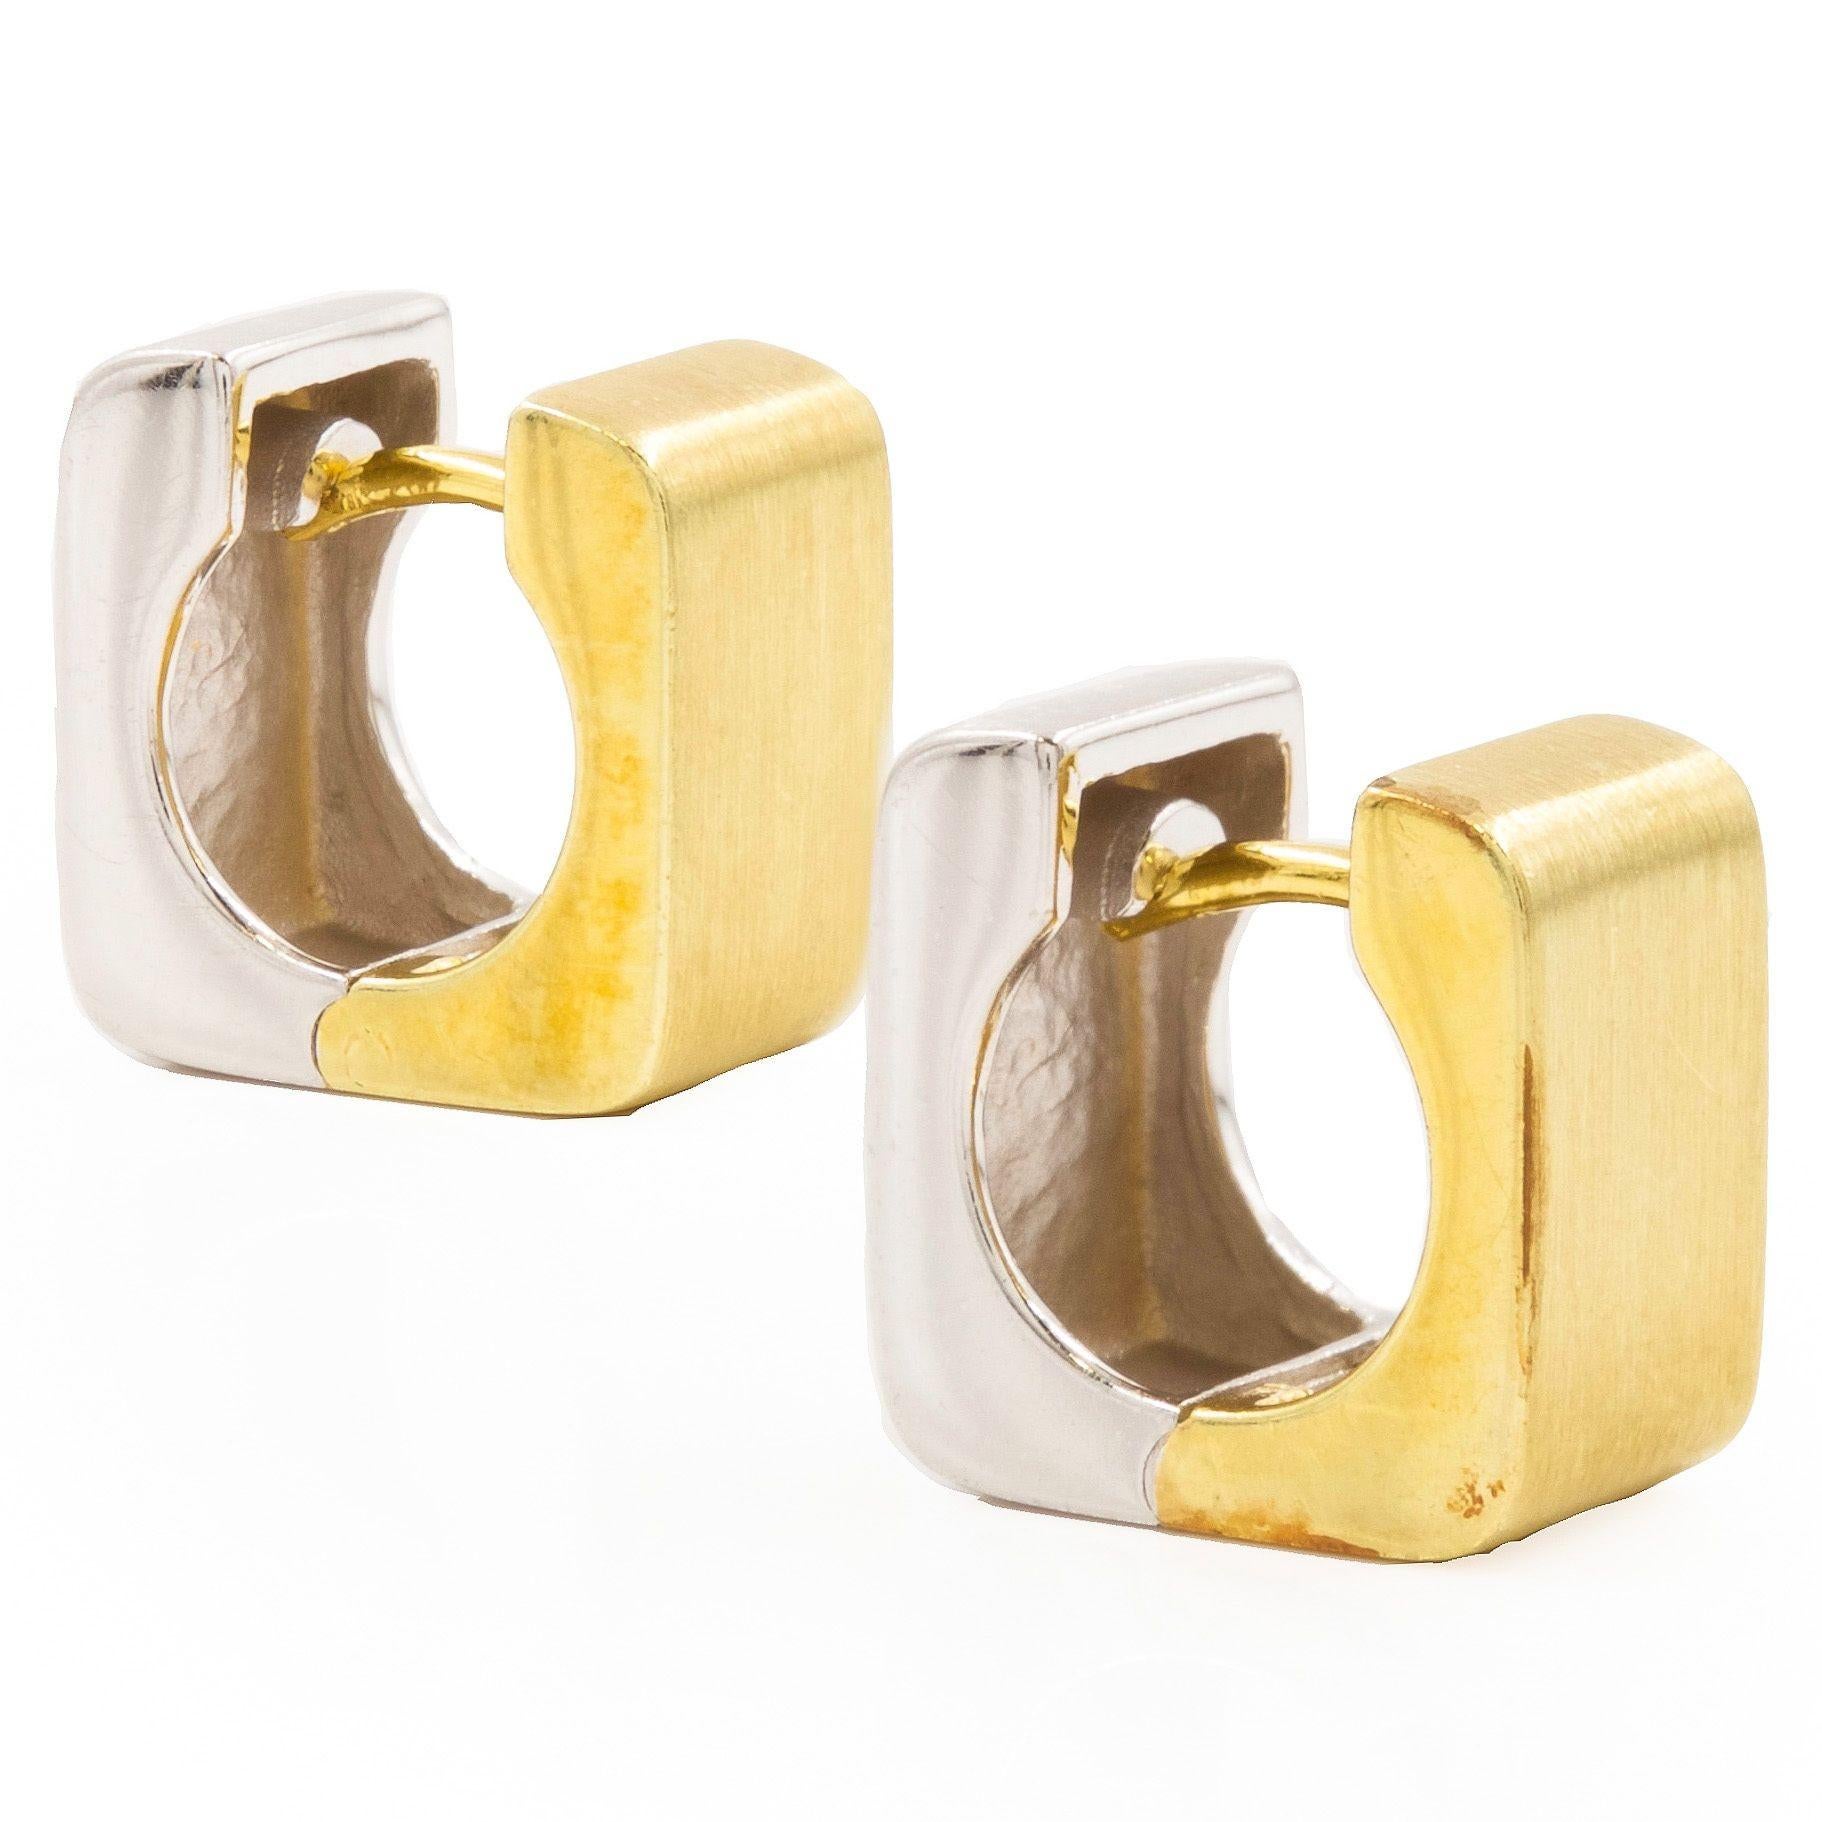 CONTEMPORARY PAIR OF WHITE-AND-YELLOW 14K GOLD HUGGIE EARRINGS
Item # 204EJC14P 

A gorgeous pair of huggie earrings executed entirely in 14 karat gold, both the yellow and white gold sides feature a beautiful brushed finish. The two halves join in